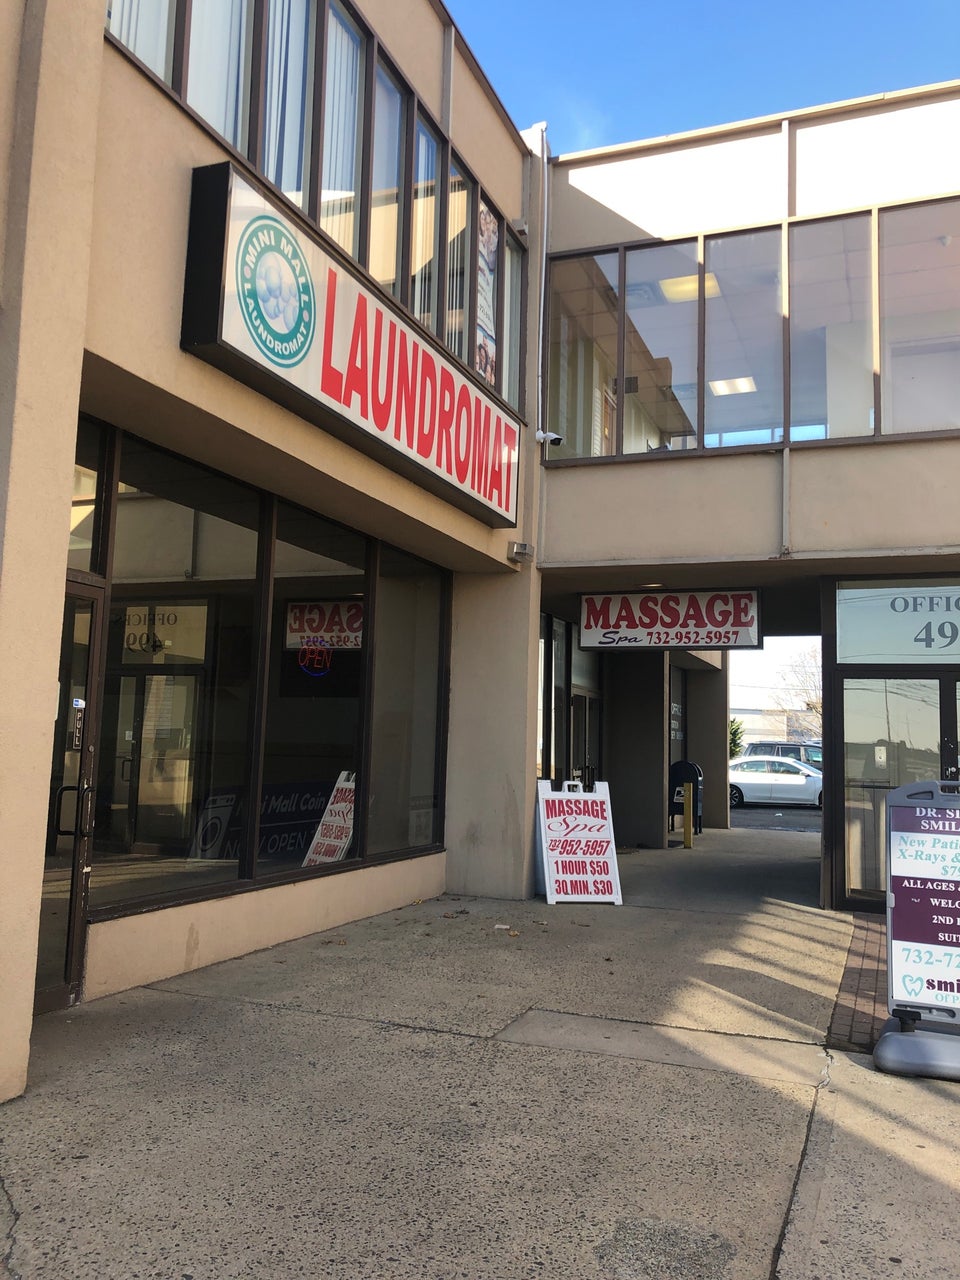 Small laundromat at mall beside massage parlor